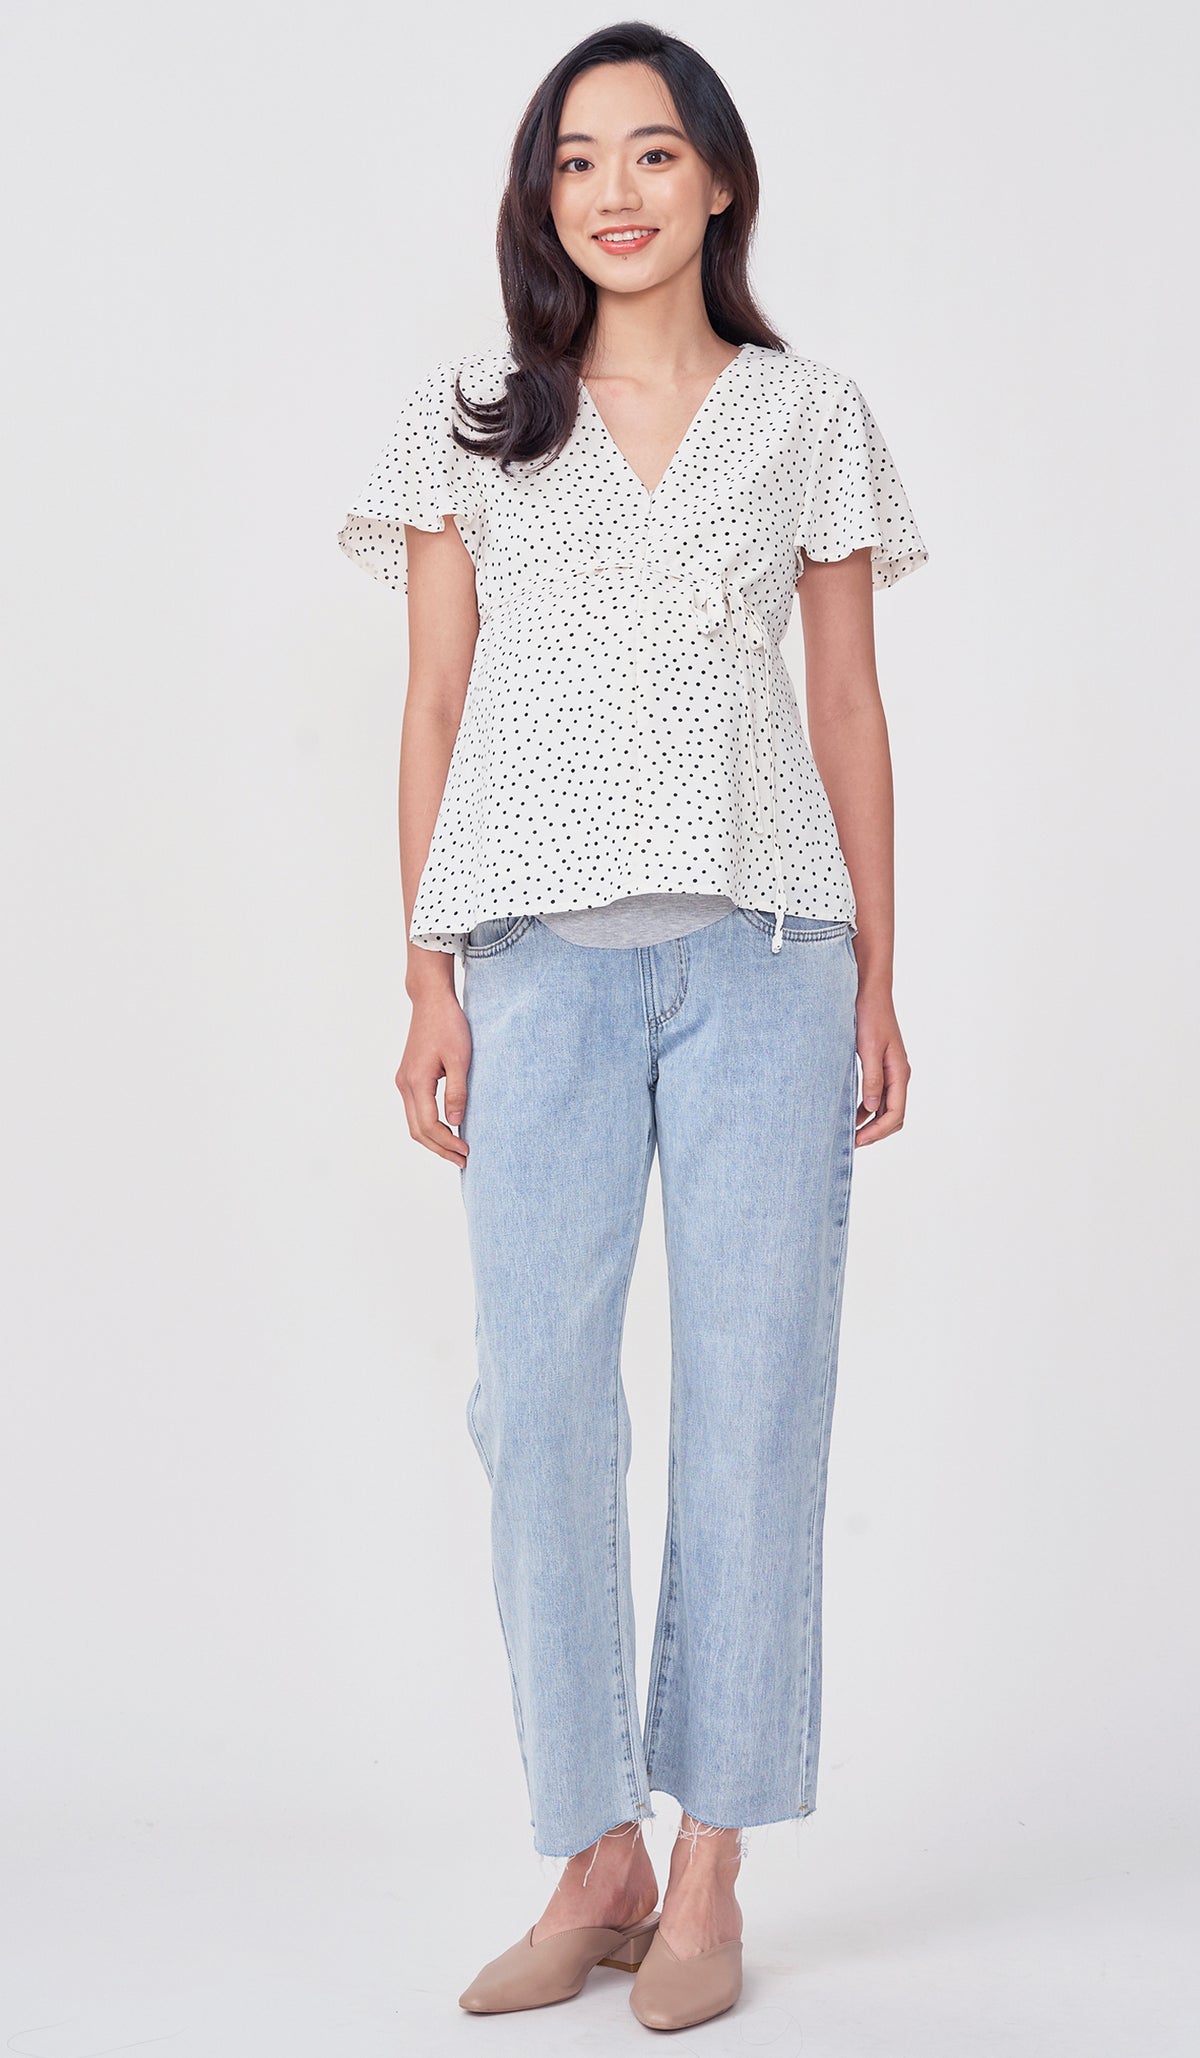 BREA DOTTED FRONT ZIP NURSING TOP WHITE